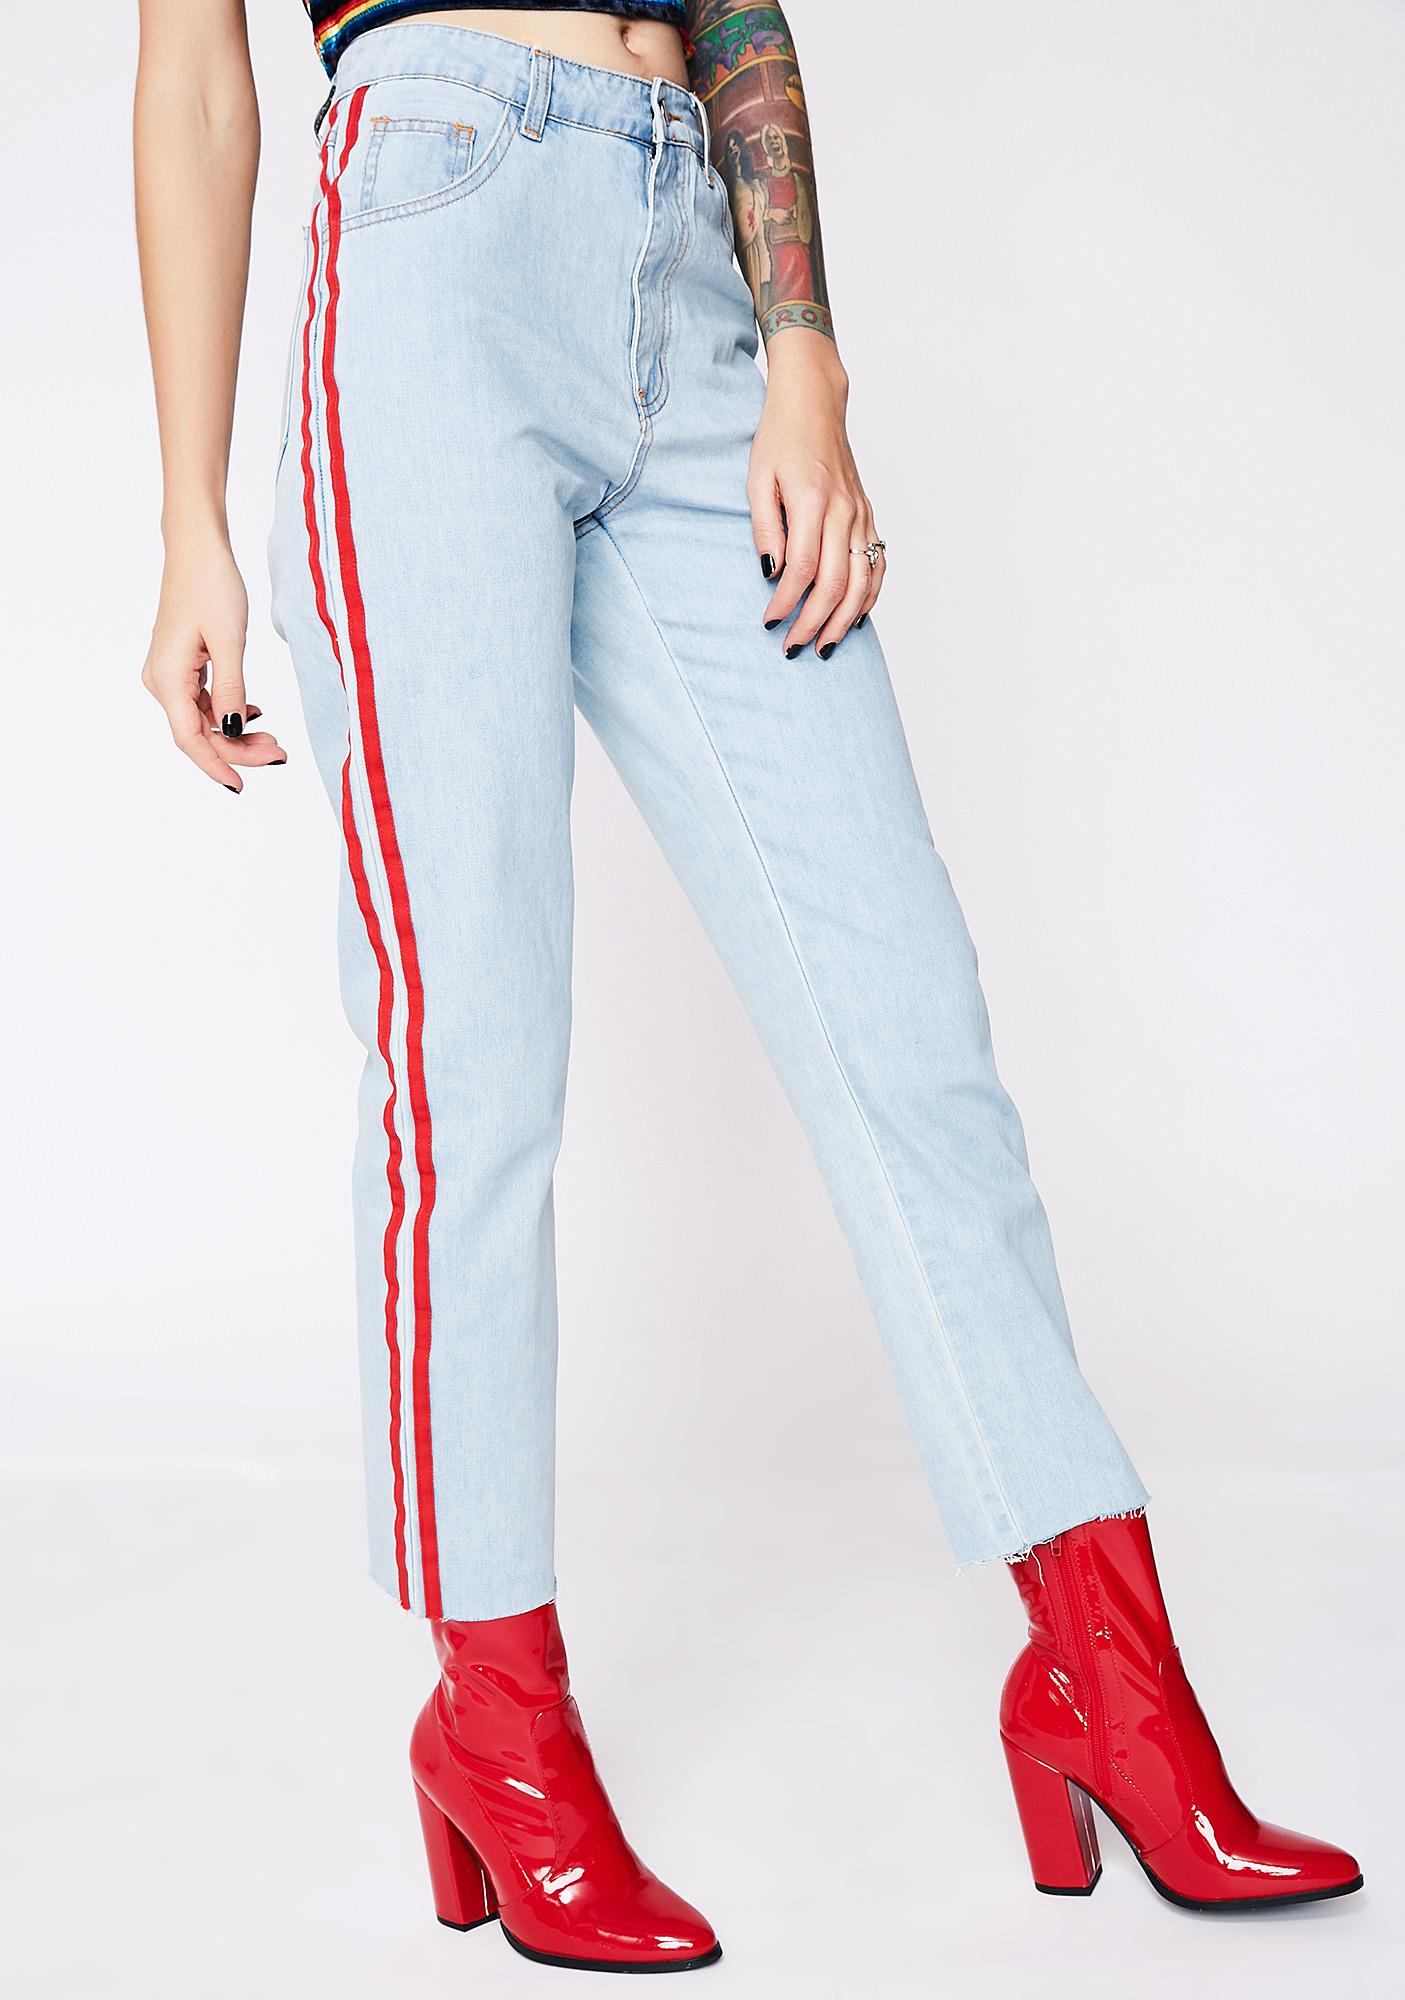 red striped jeans